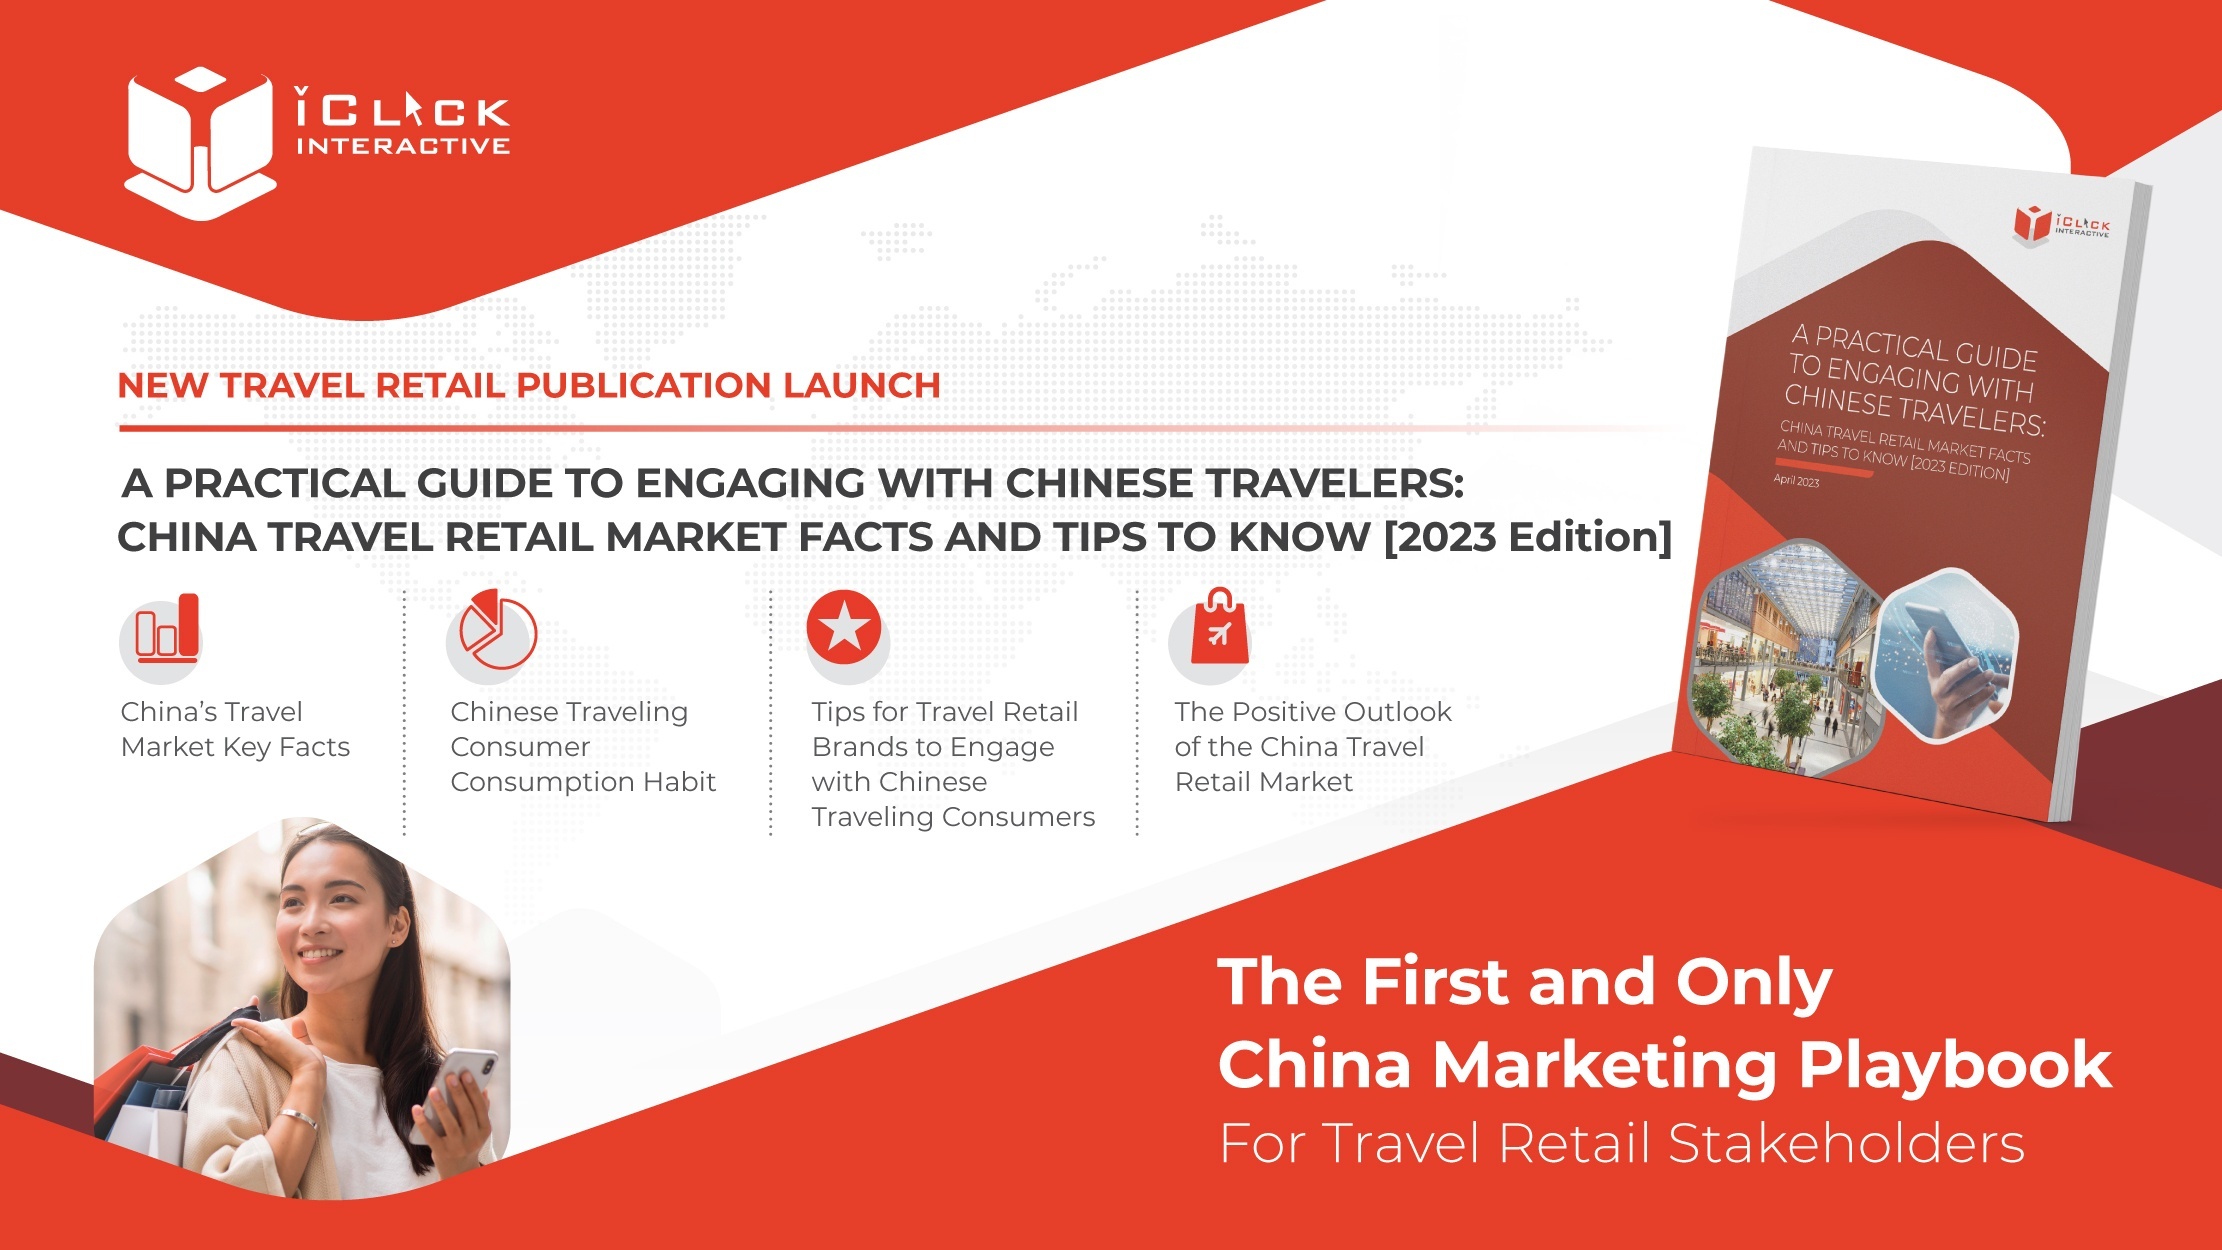 iClick’s New Travel Retail Publication Launch – “A Practical Guide to Engaging with Chinese Travelers: China Travel Retail Market Facts and Tips to Know [2023 Edition]